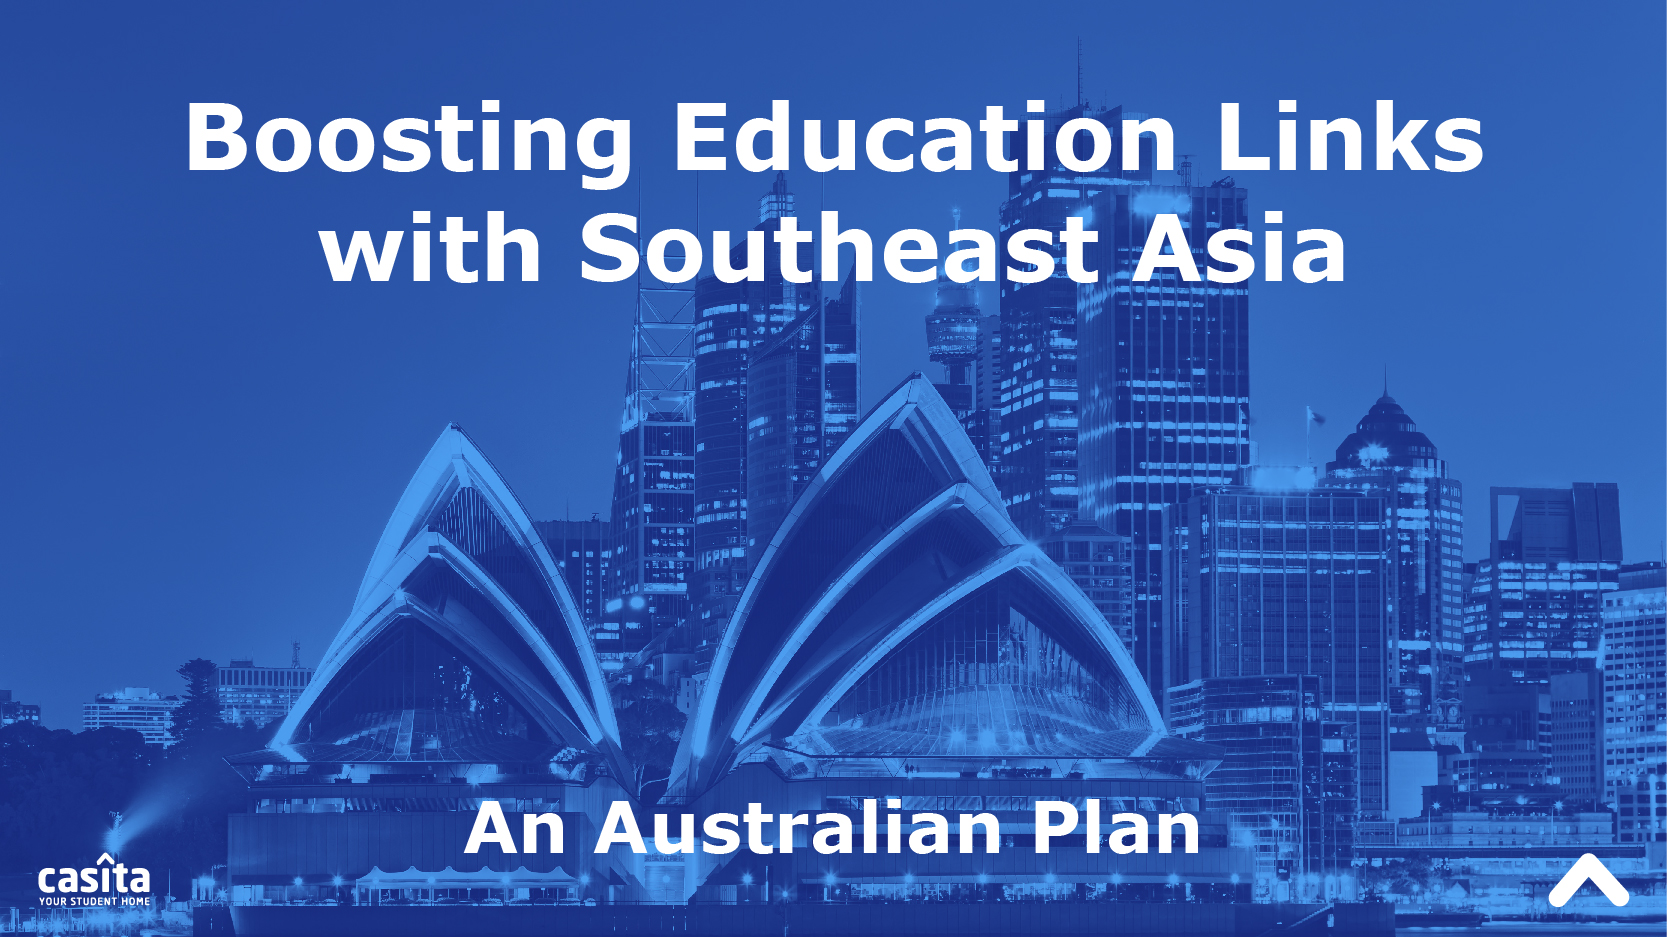 Australian Plan: Boost Education Links with Southeast Asia